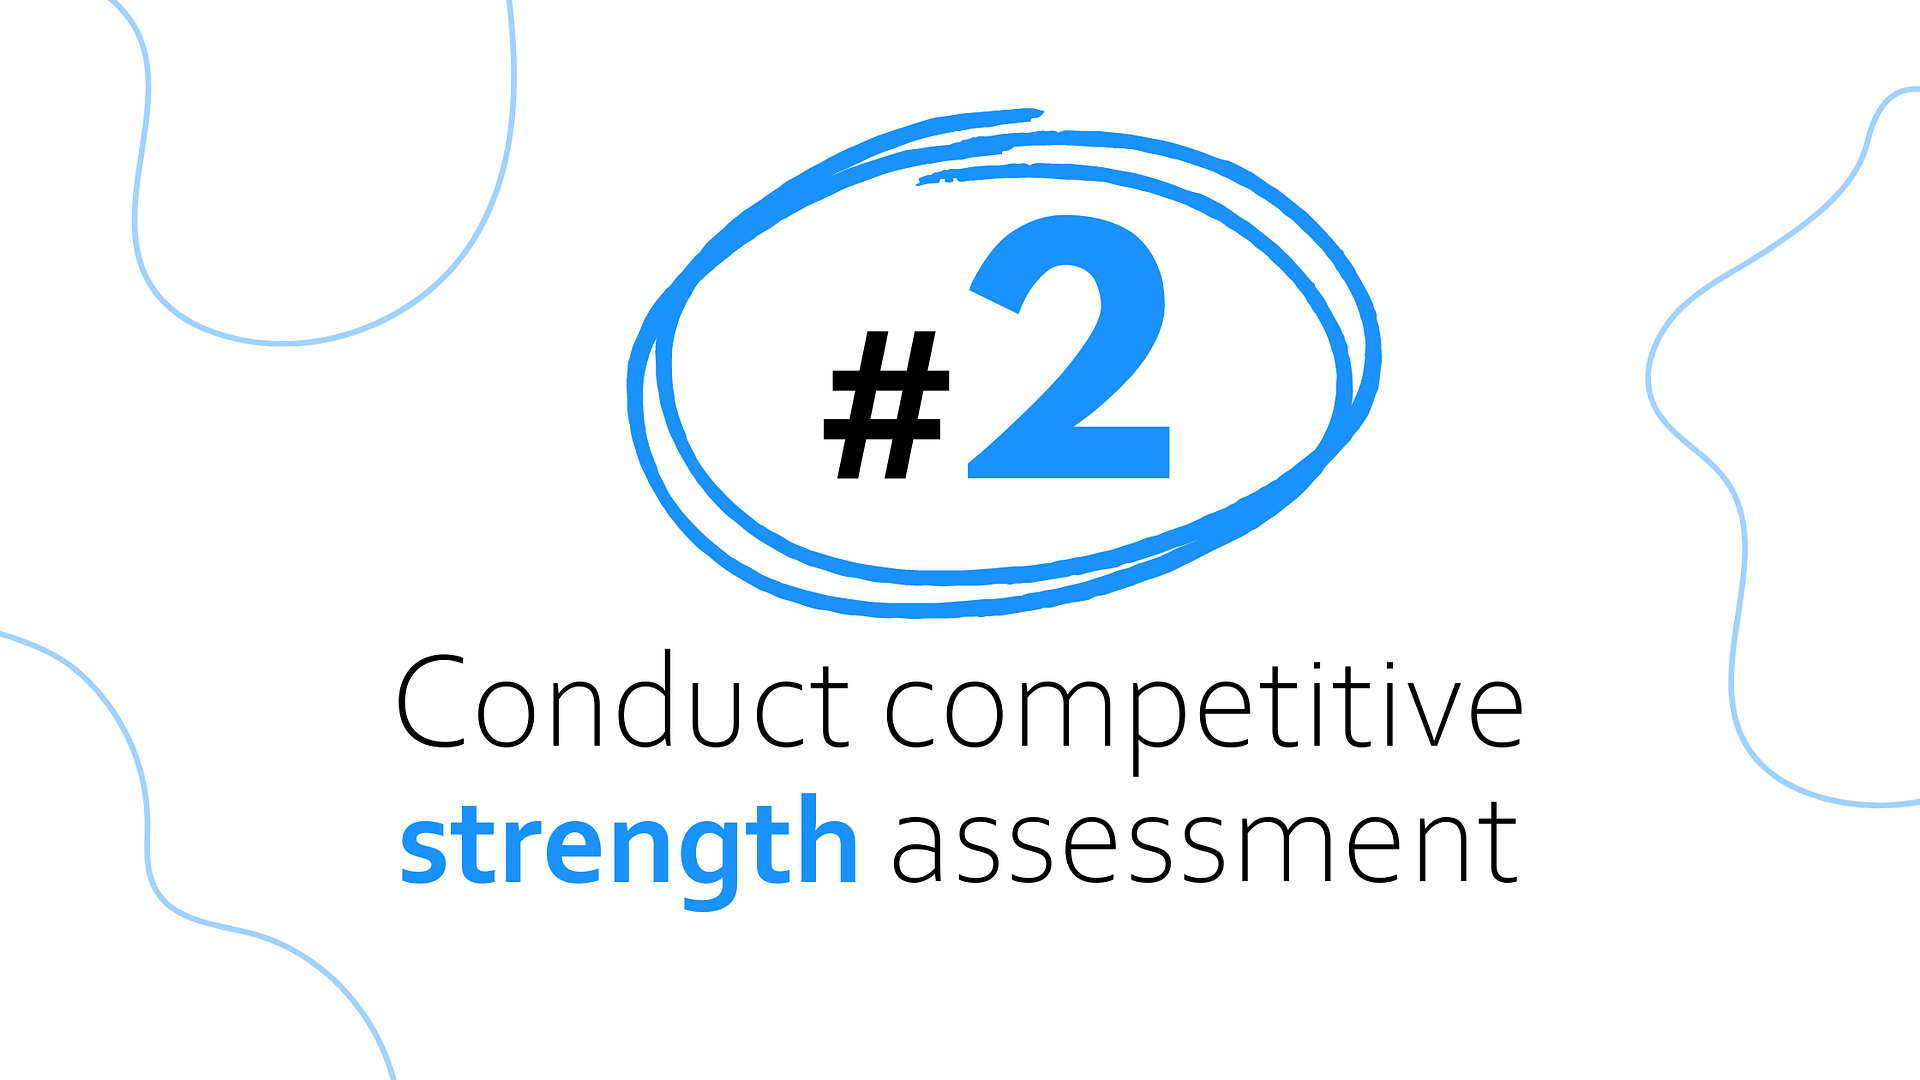 Conduct competitive strength assessment - competitor SWOT analysis (step 2)